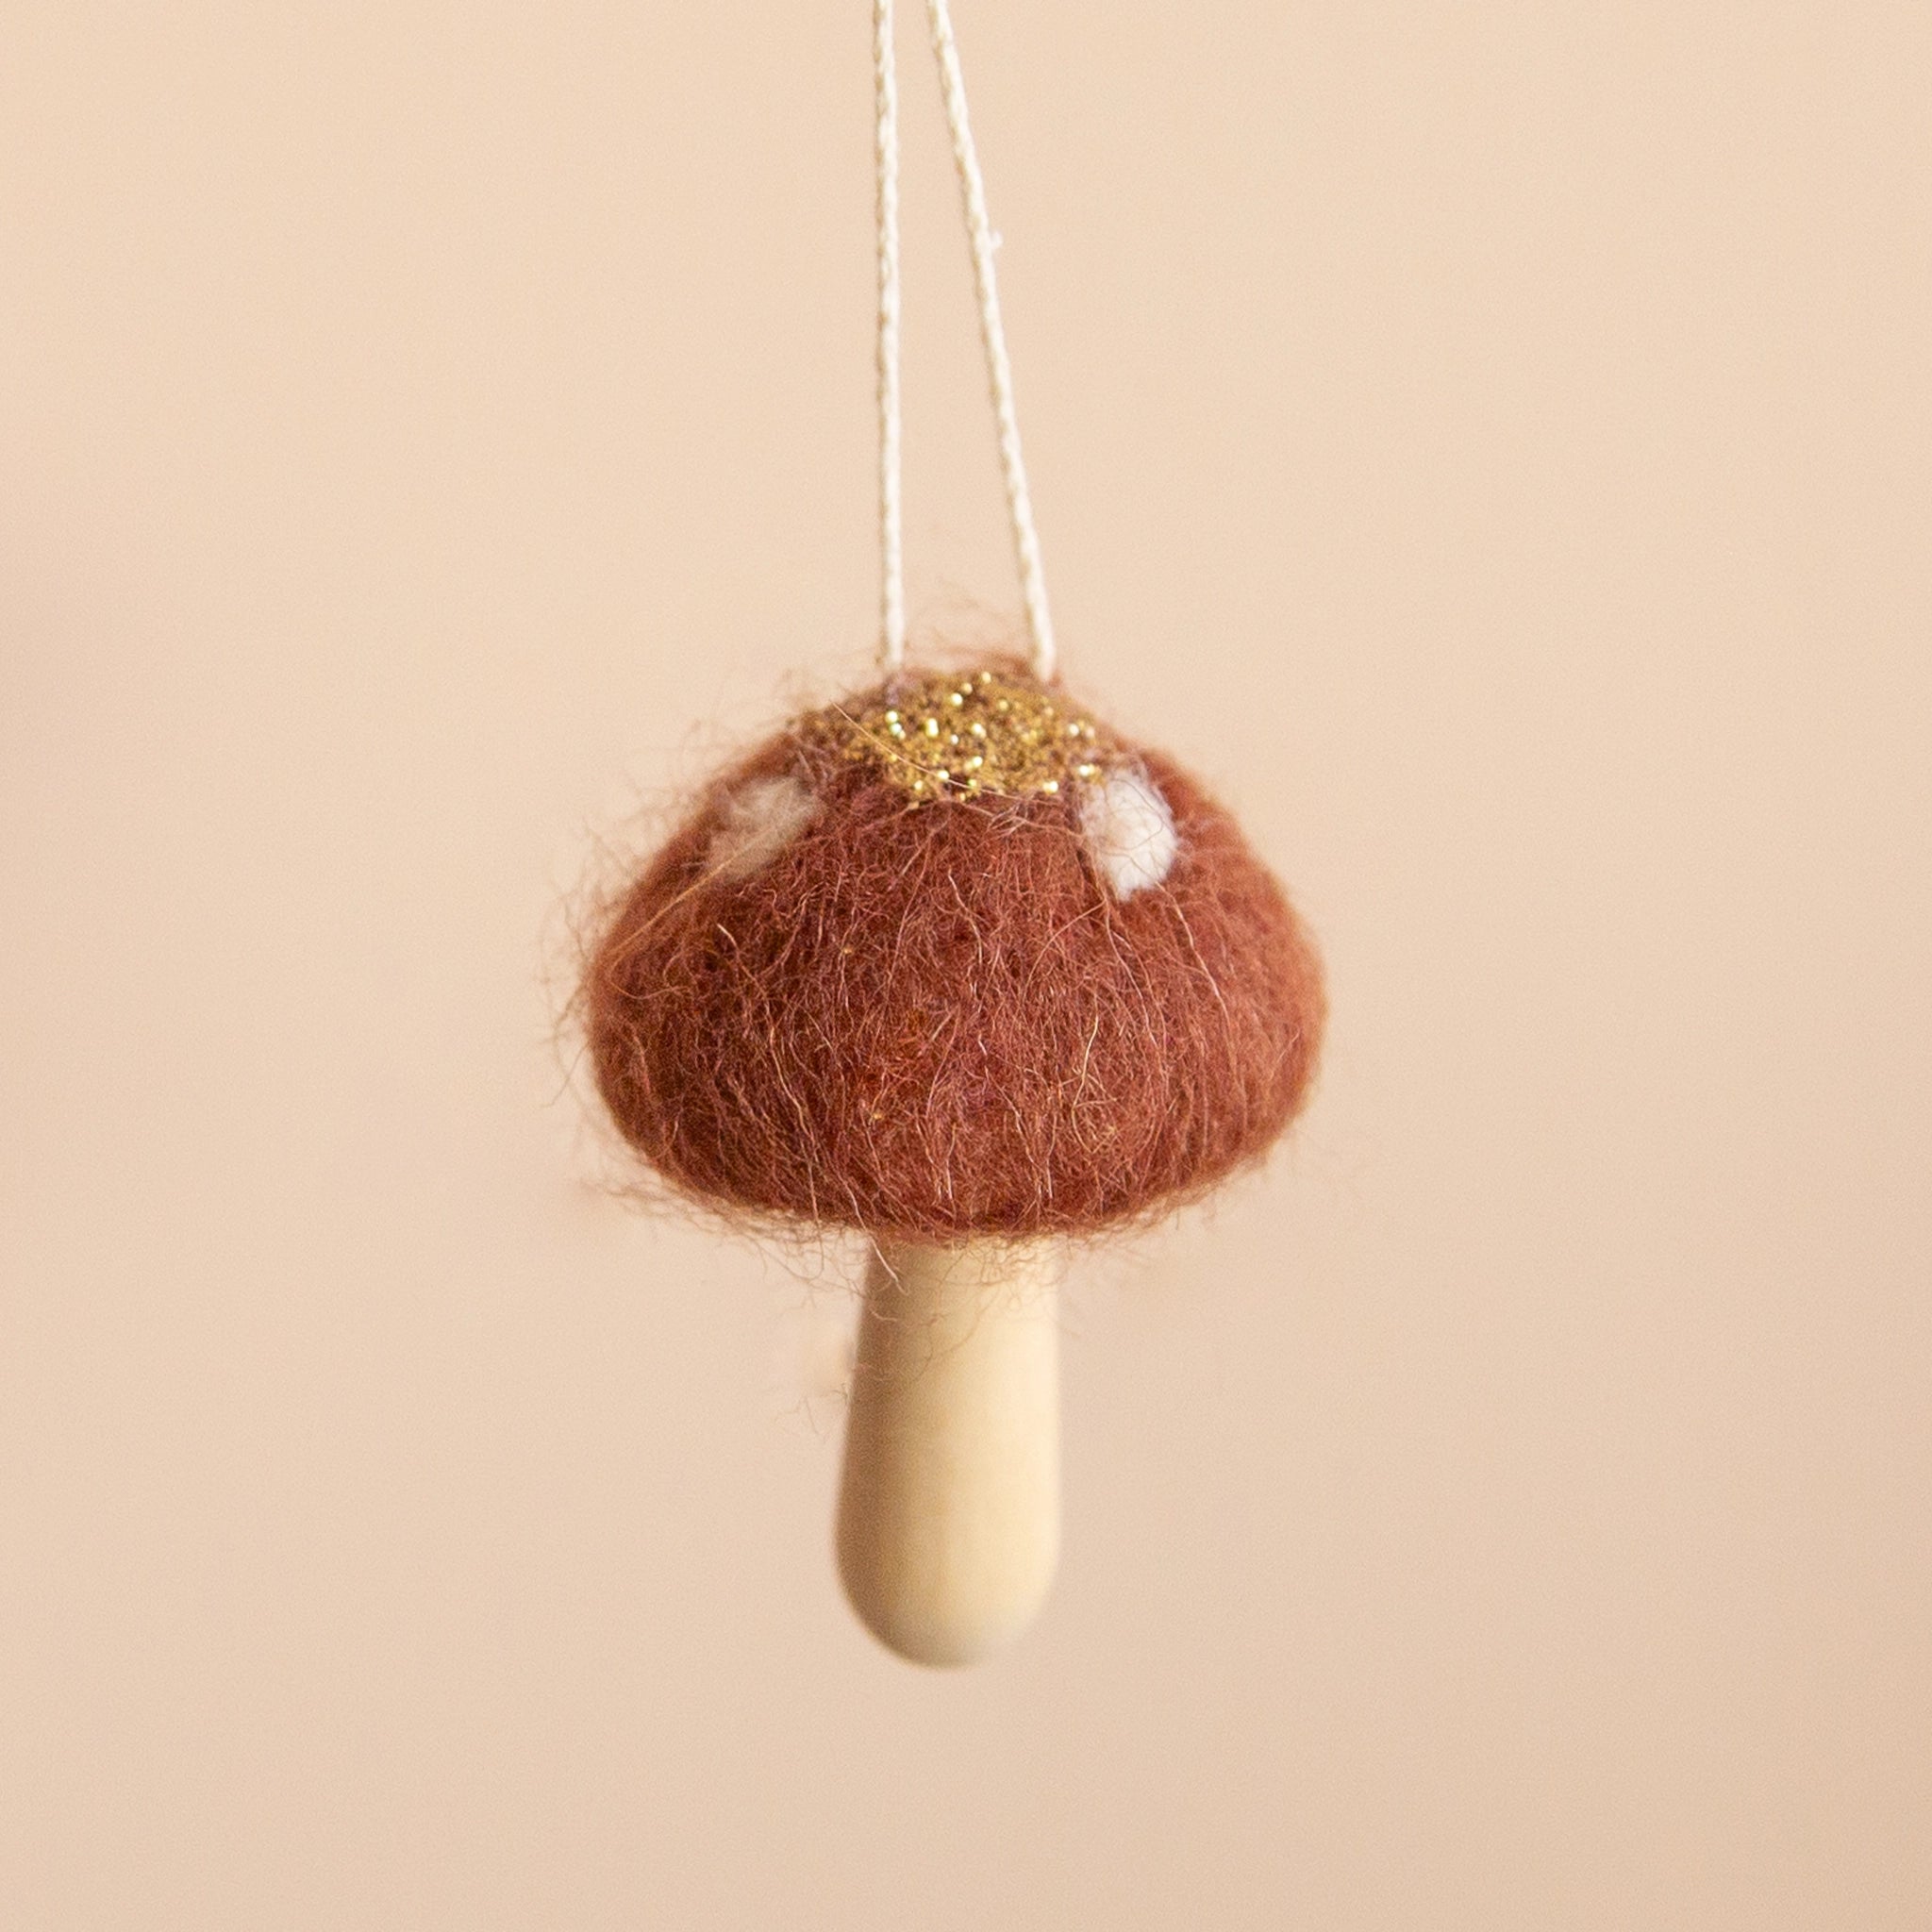 A cocoa colored mushroom ornament with white spots and a light wood stem.